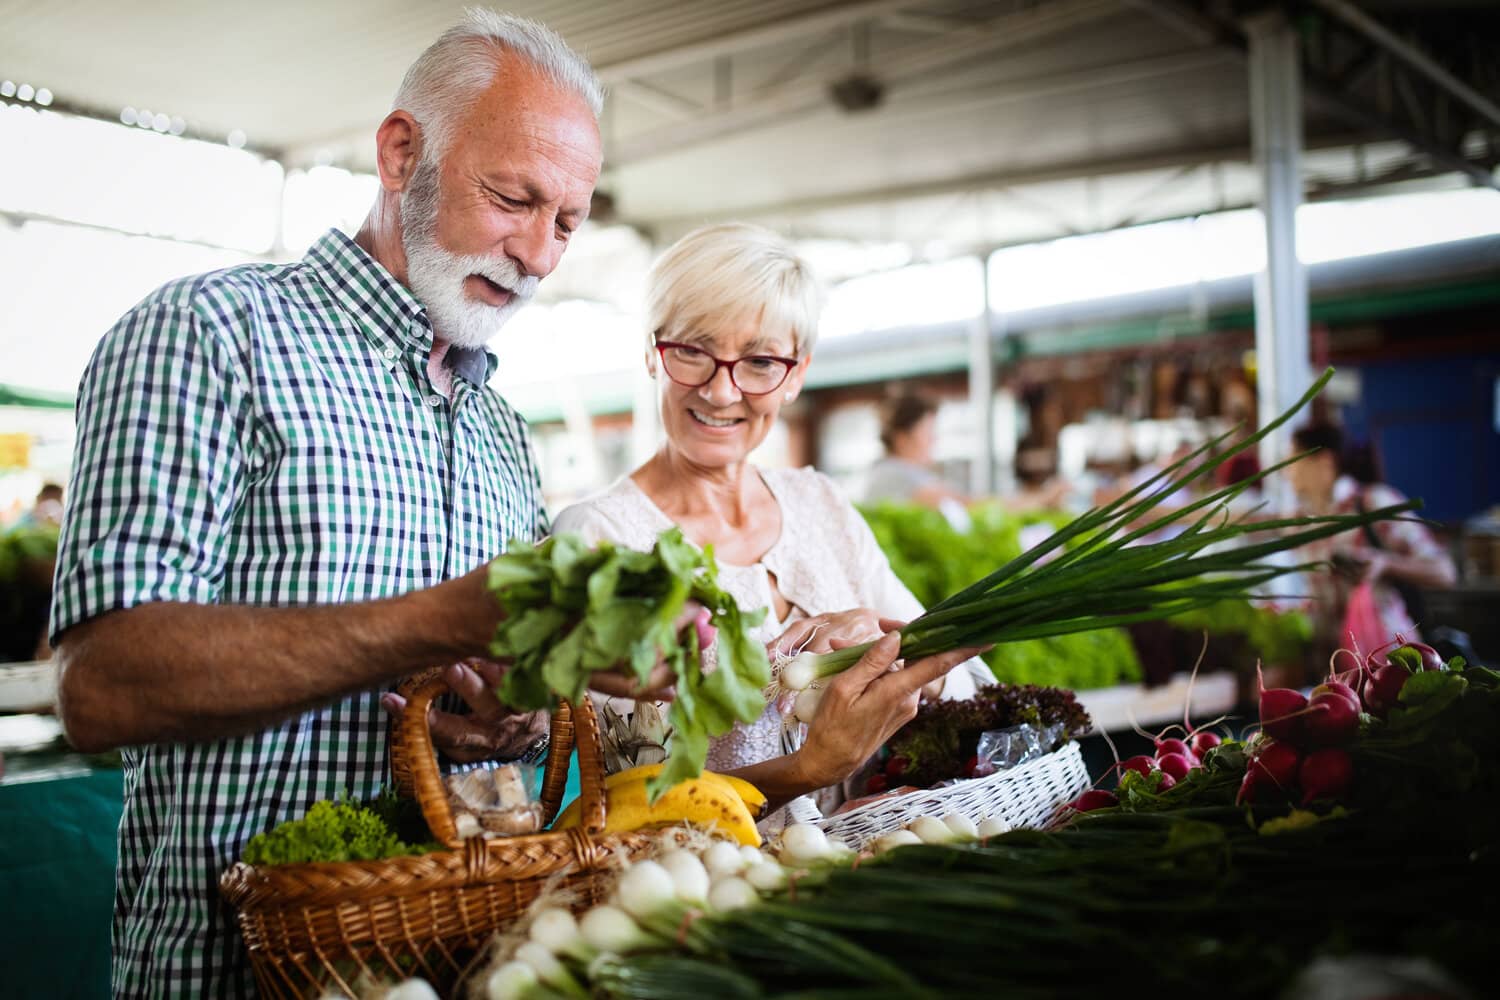 Why Shopping at Farmers’ Markets is the Best Practice